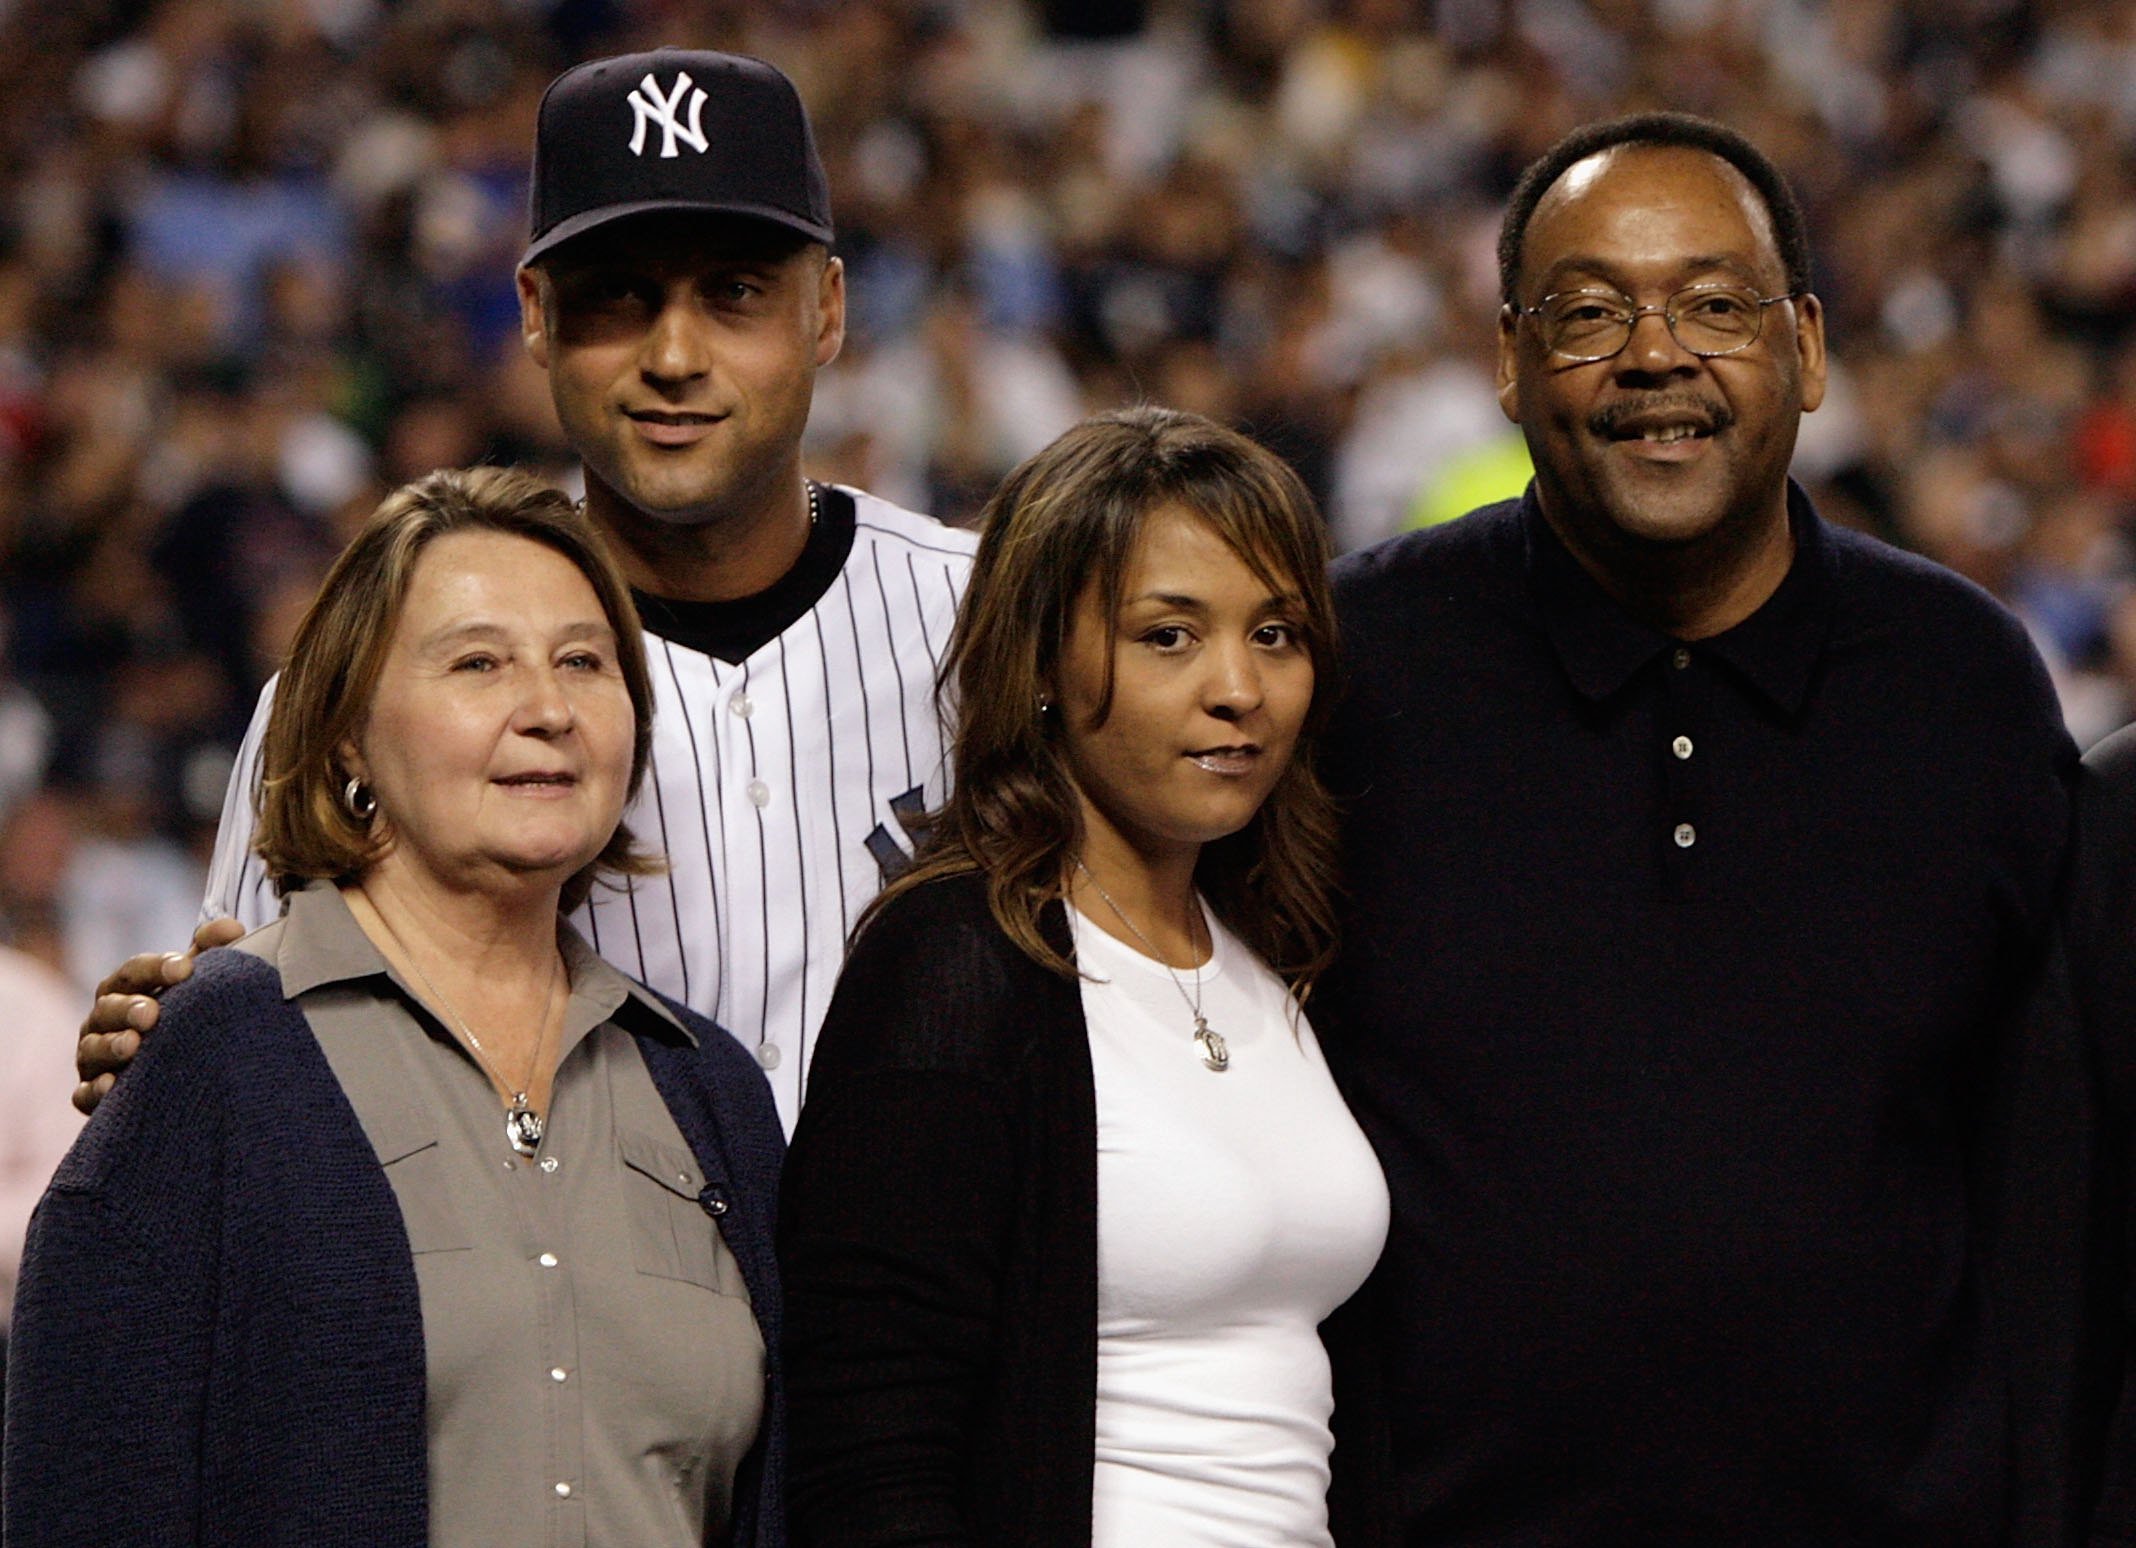 Derek Jeter with his parents Charles and Dorothy Jeter, and sister Sharlee Jeter, during pregame between the Baltimore Orioles and the New York Yankees on September 21, 2008, New York City. | Source: Getty Images